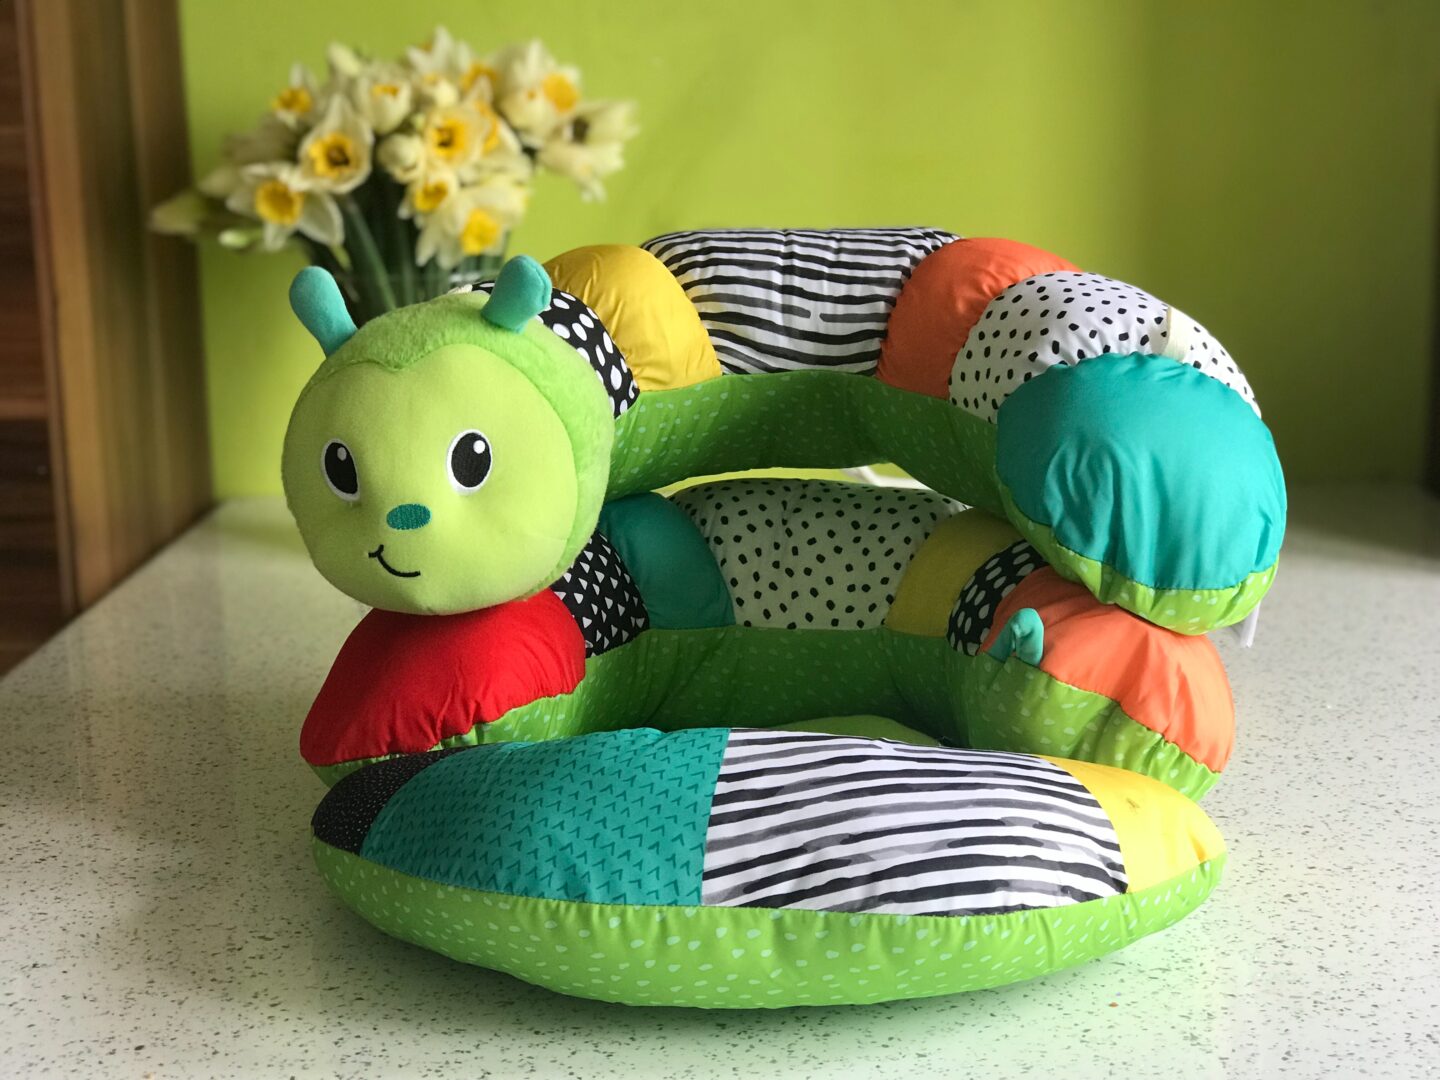 The Infantino Prop-a-Pillar tummy time support stacked so it becomes the seated support. Yellow daffodils in a vase in the background